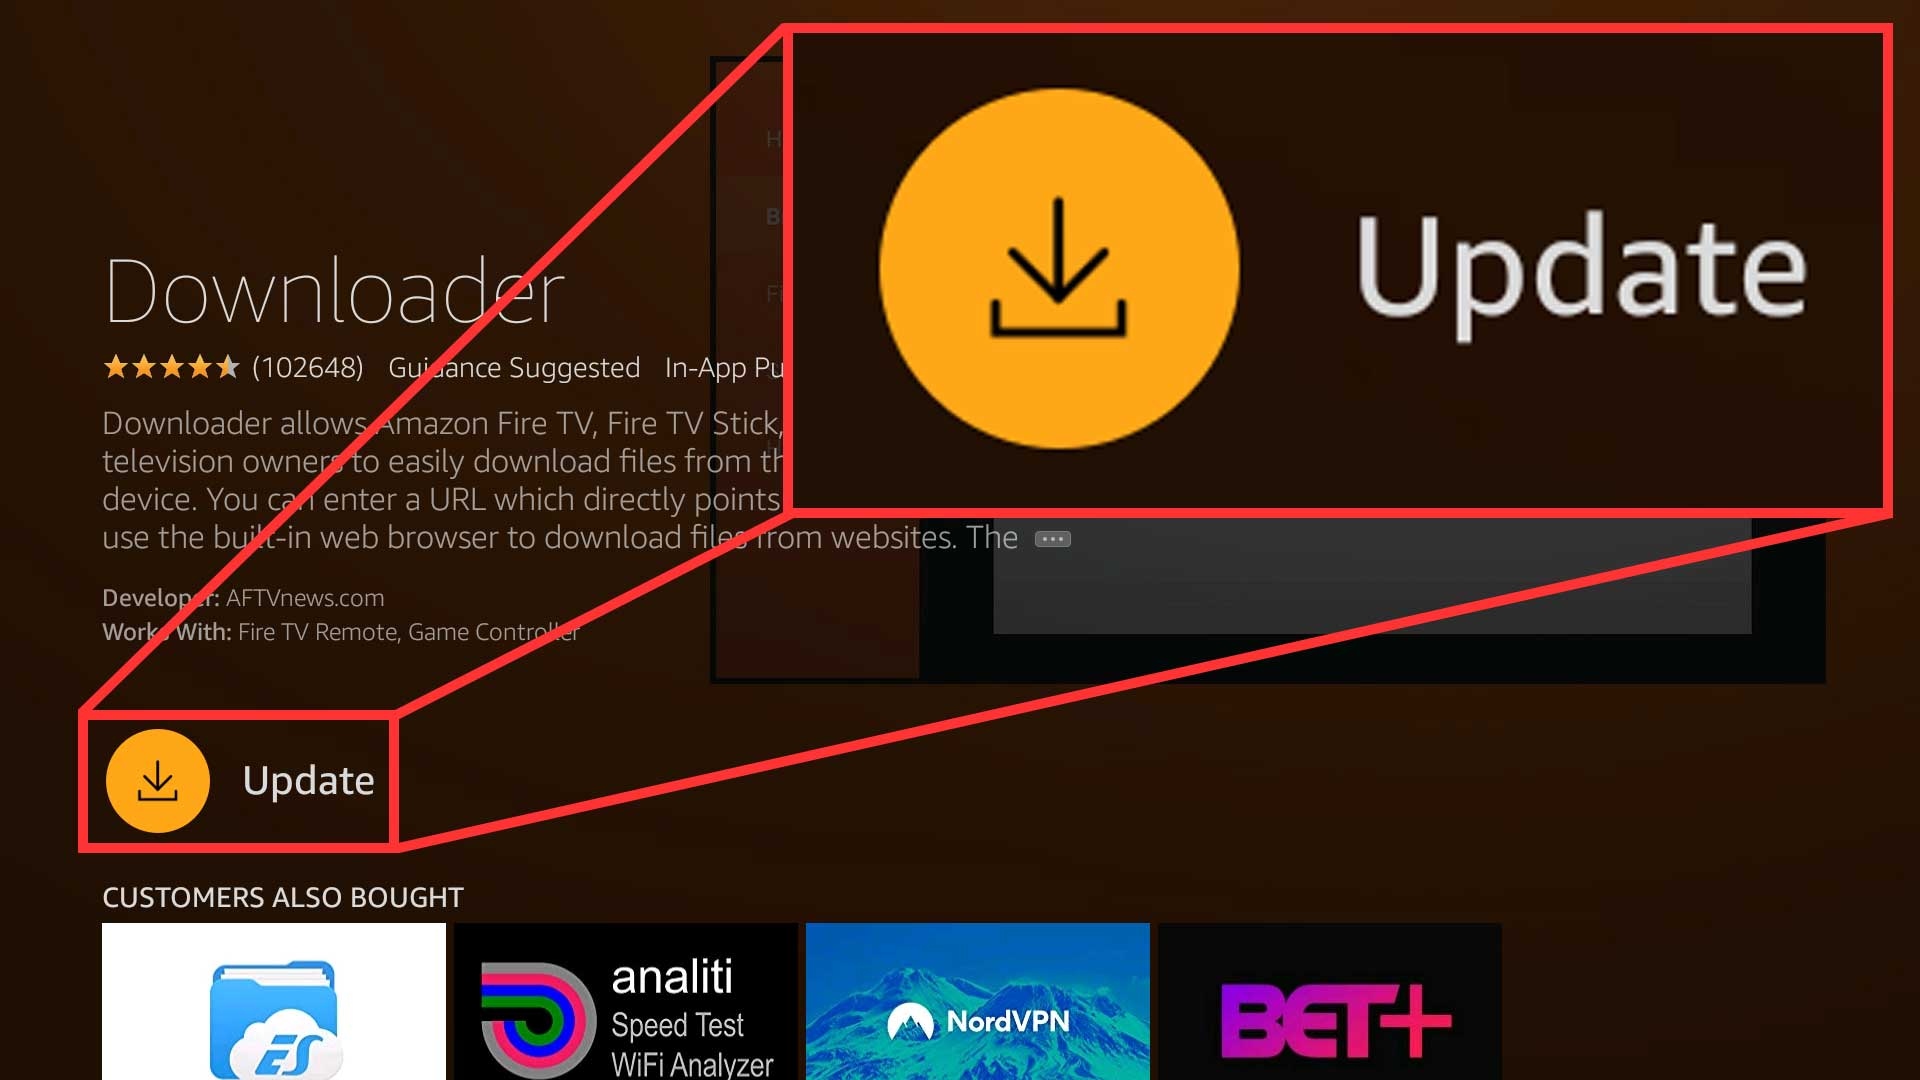 How To Update Amazon Fire Stick